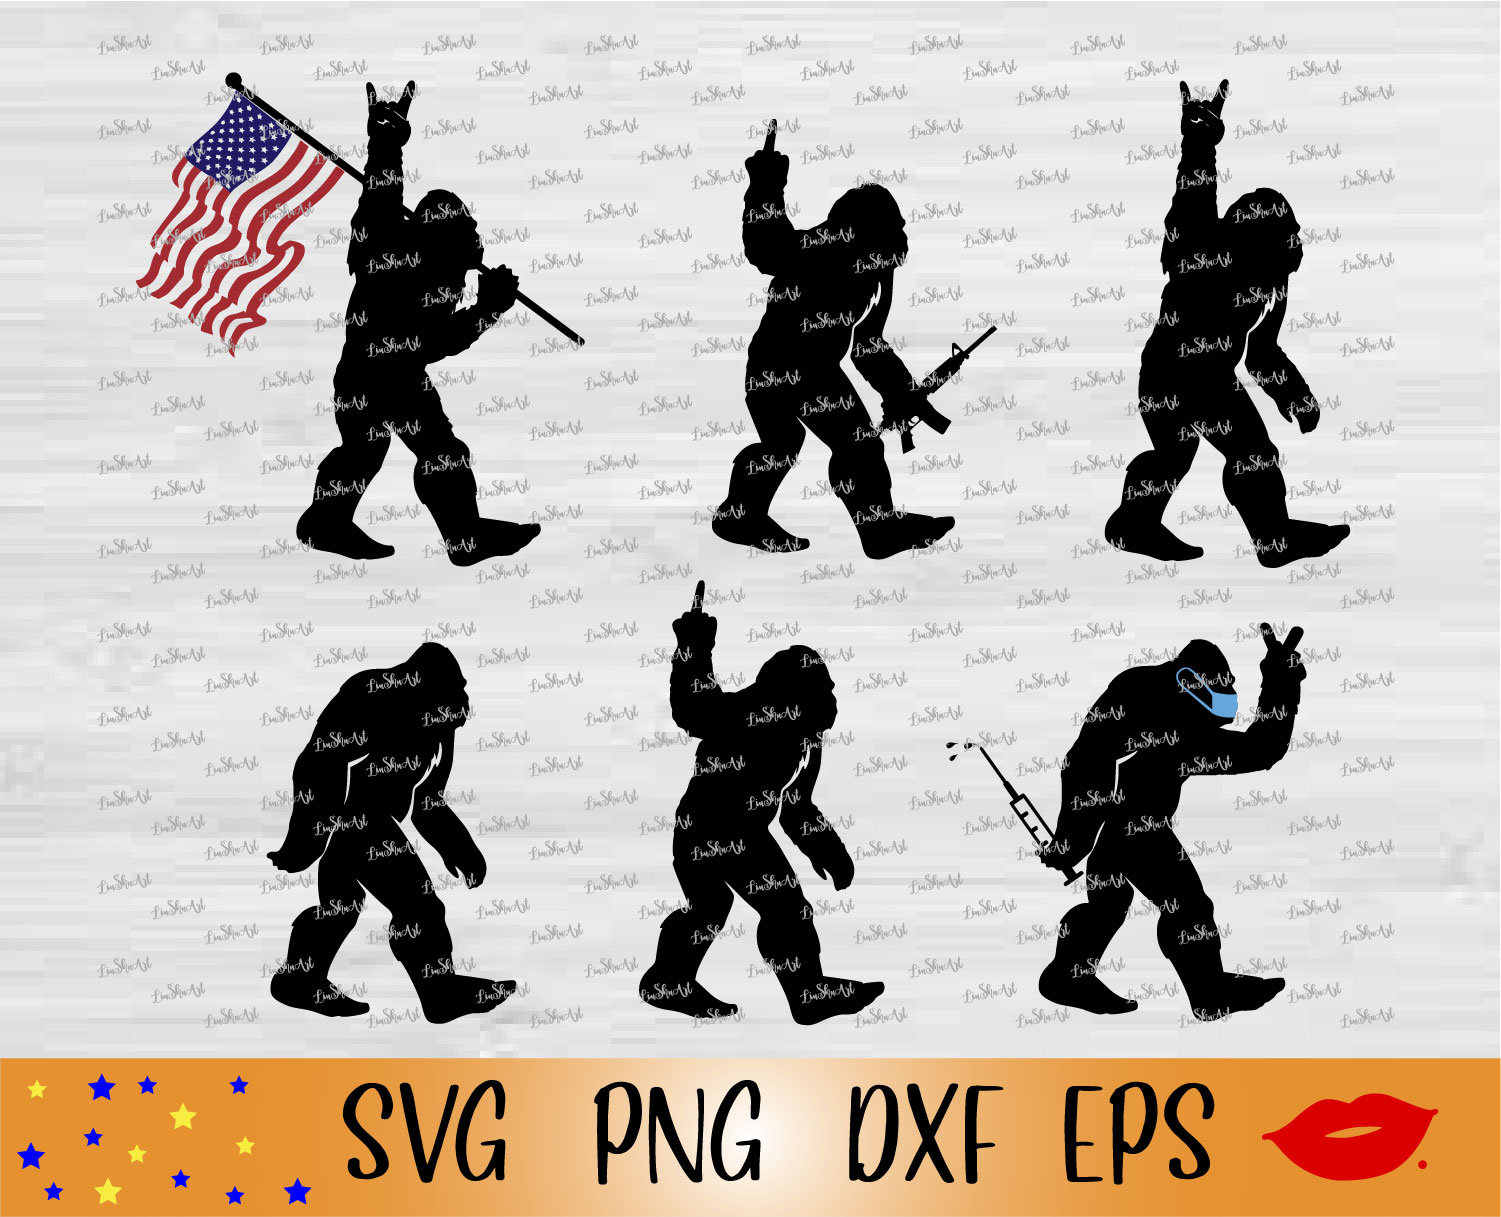 Finger Walk Walking Svg, Eps, Png, Dxf, Clipart for Cricut and